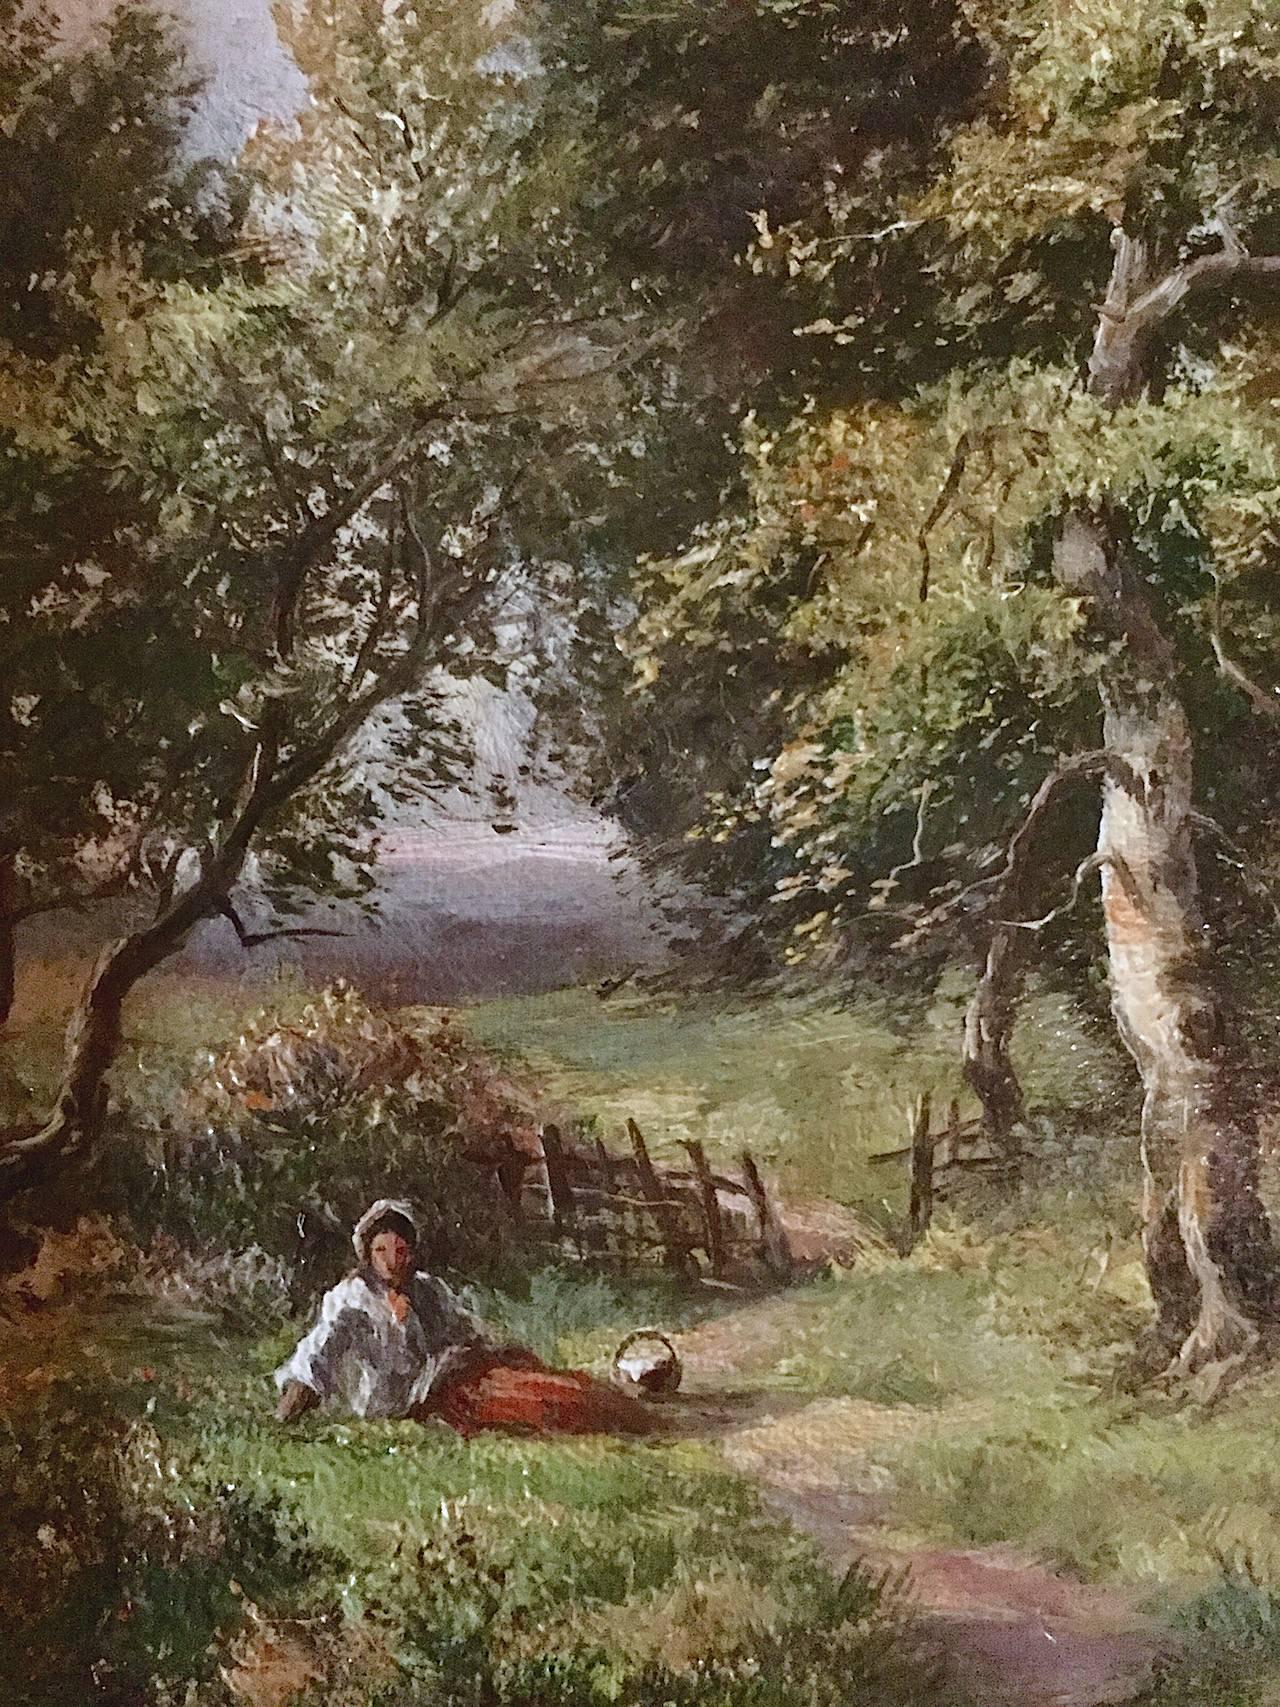 William Stanley of Nottingham.  1875
'An English Landscape Genre Scene'
Oil on Canvas.
Total size including painting and frame: 33cm x 39cm x 4cm

Next to nothing is known about this artist, needless to say, he appears to have resided in Nottingham